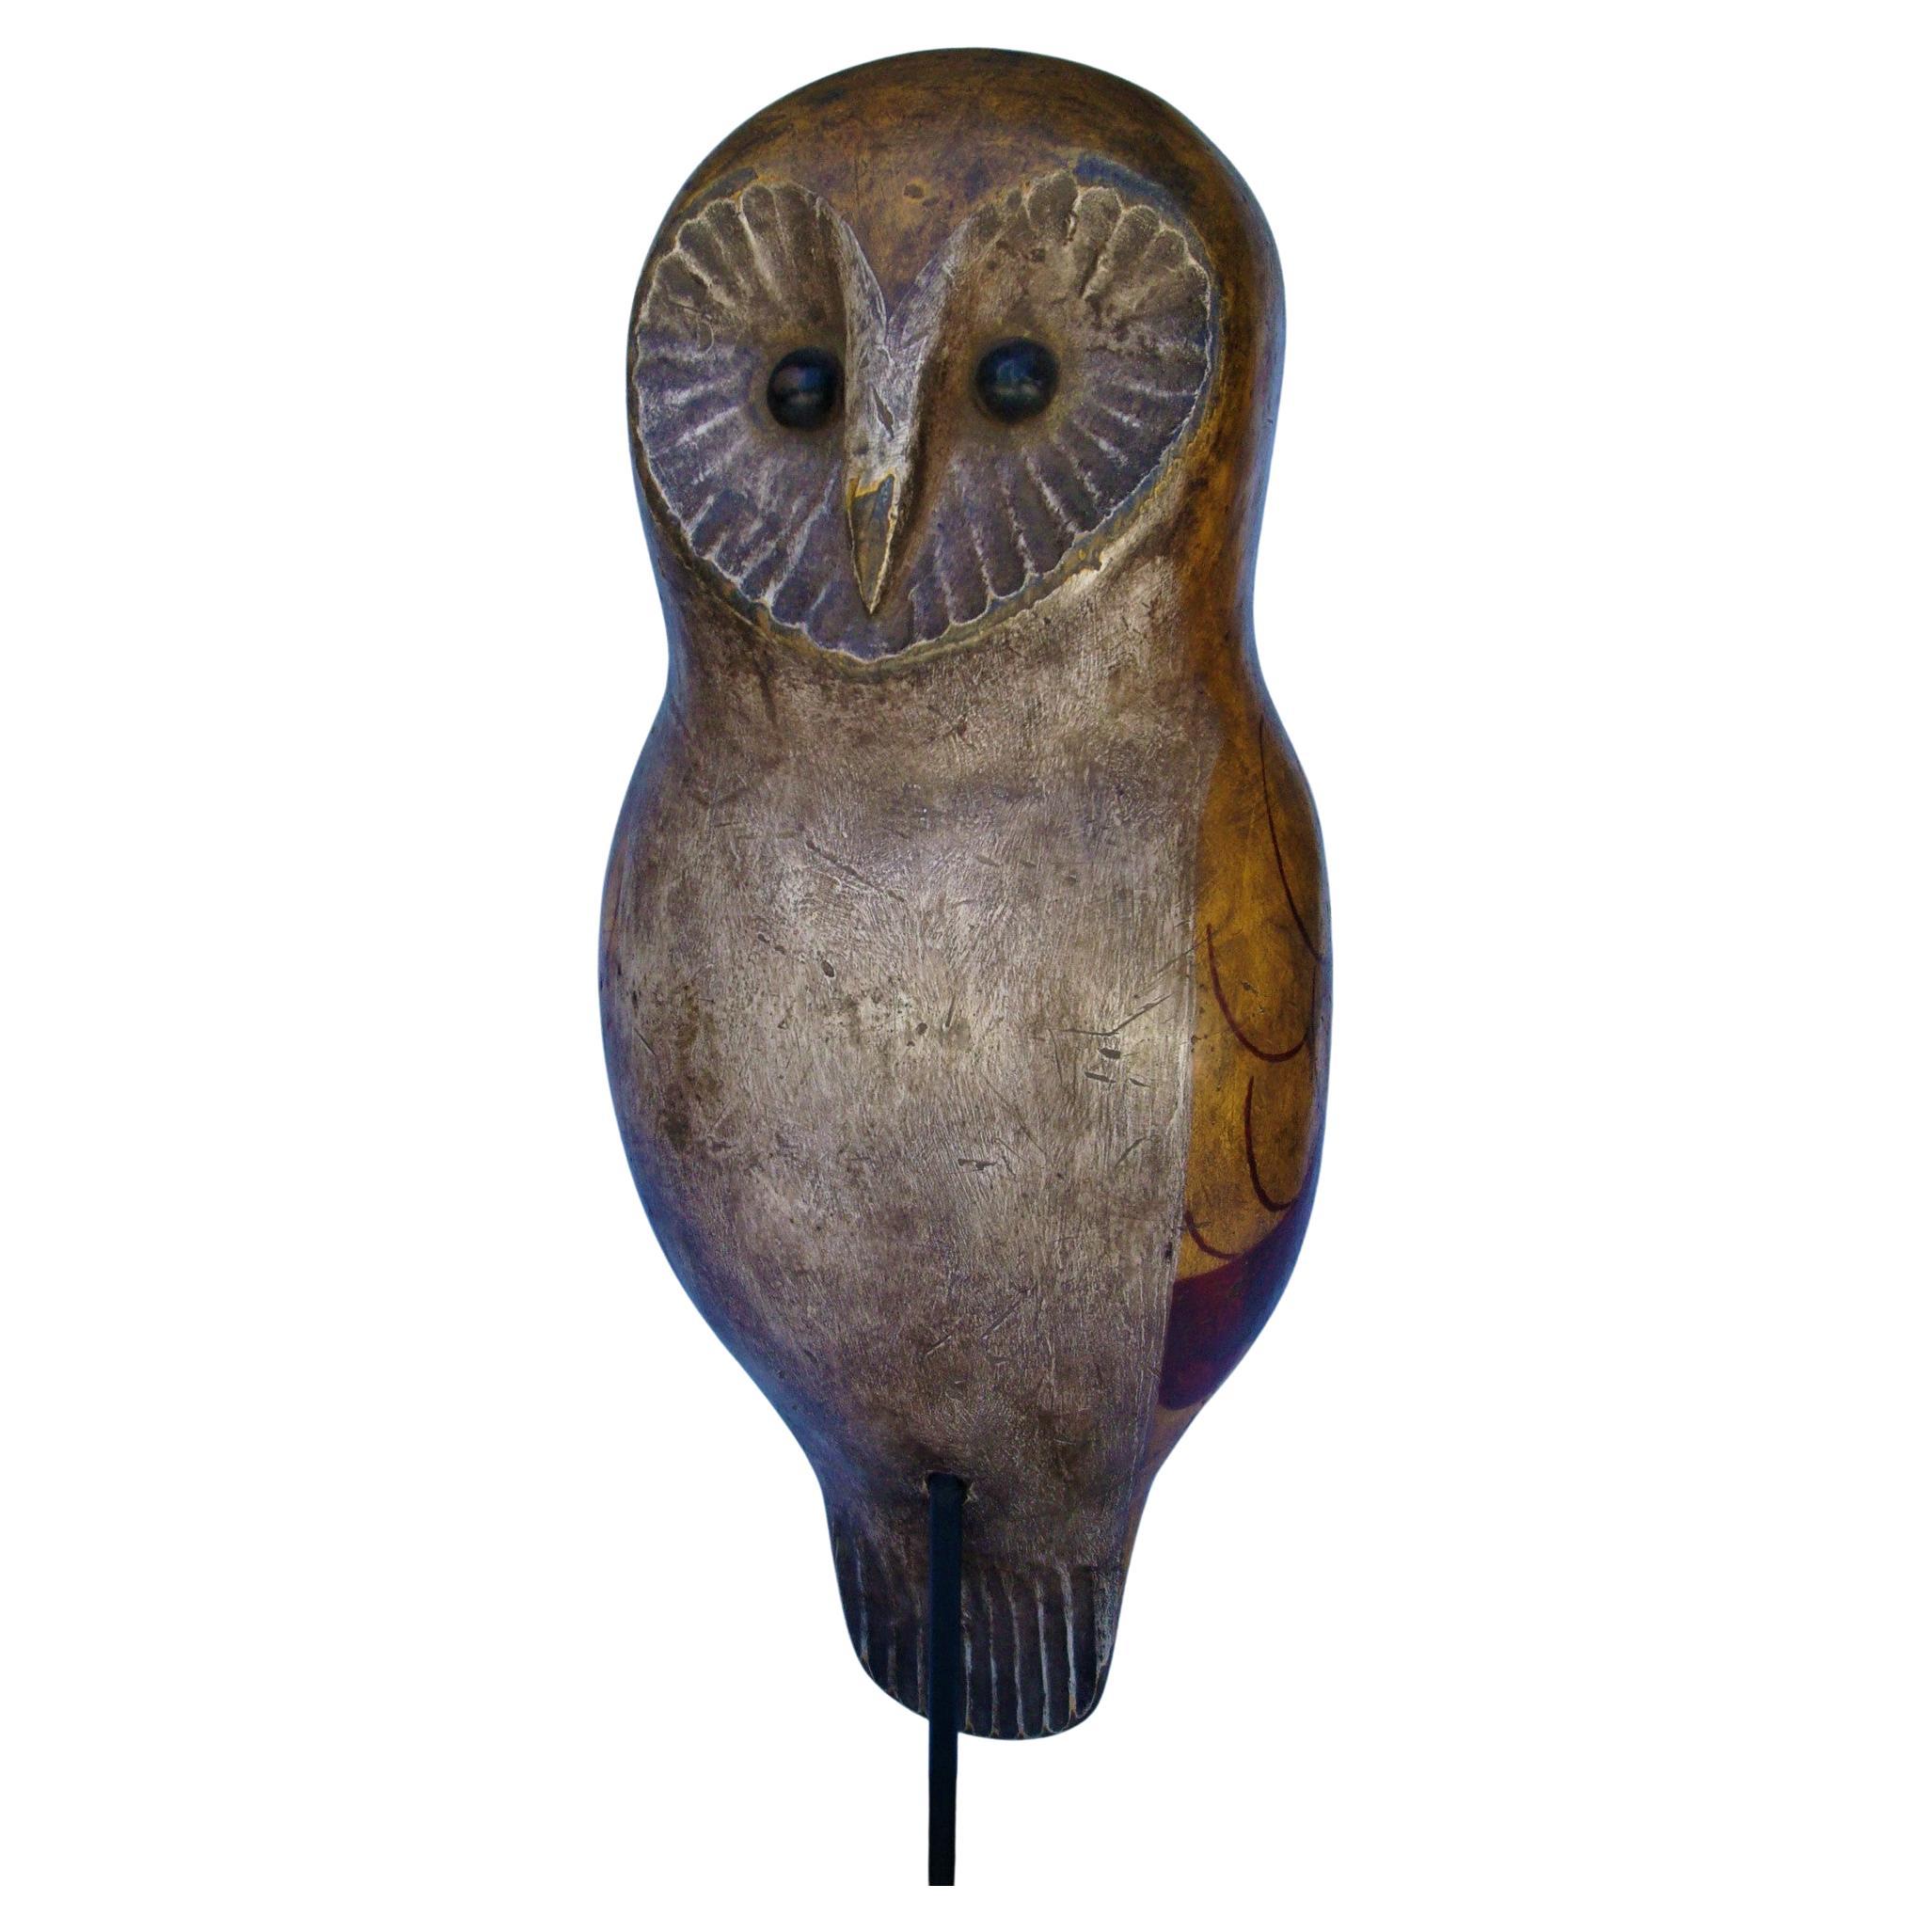 Folk Art carved and painted owl decoy, USA 1900's
A decorative barn owl carving decoy 
Original paint with even wear.
Mounted over a new iron stand.